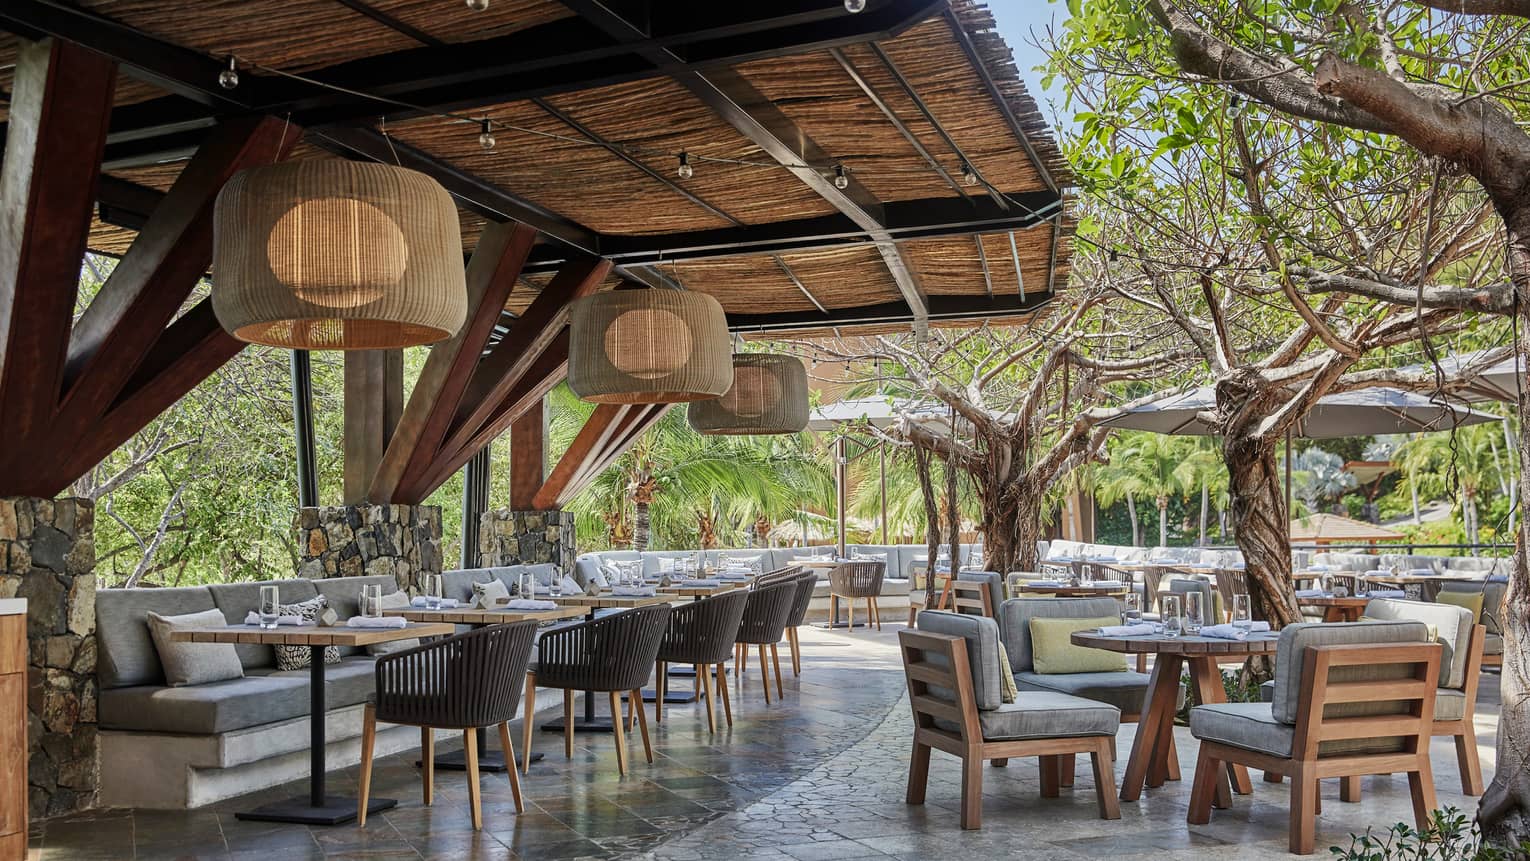 Bahia restaurant patio dining tables and chairs with thick grey cushions, large bamboo round lights hang from awning